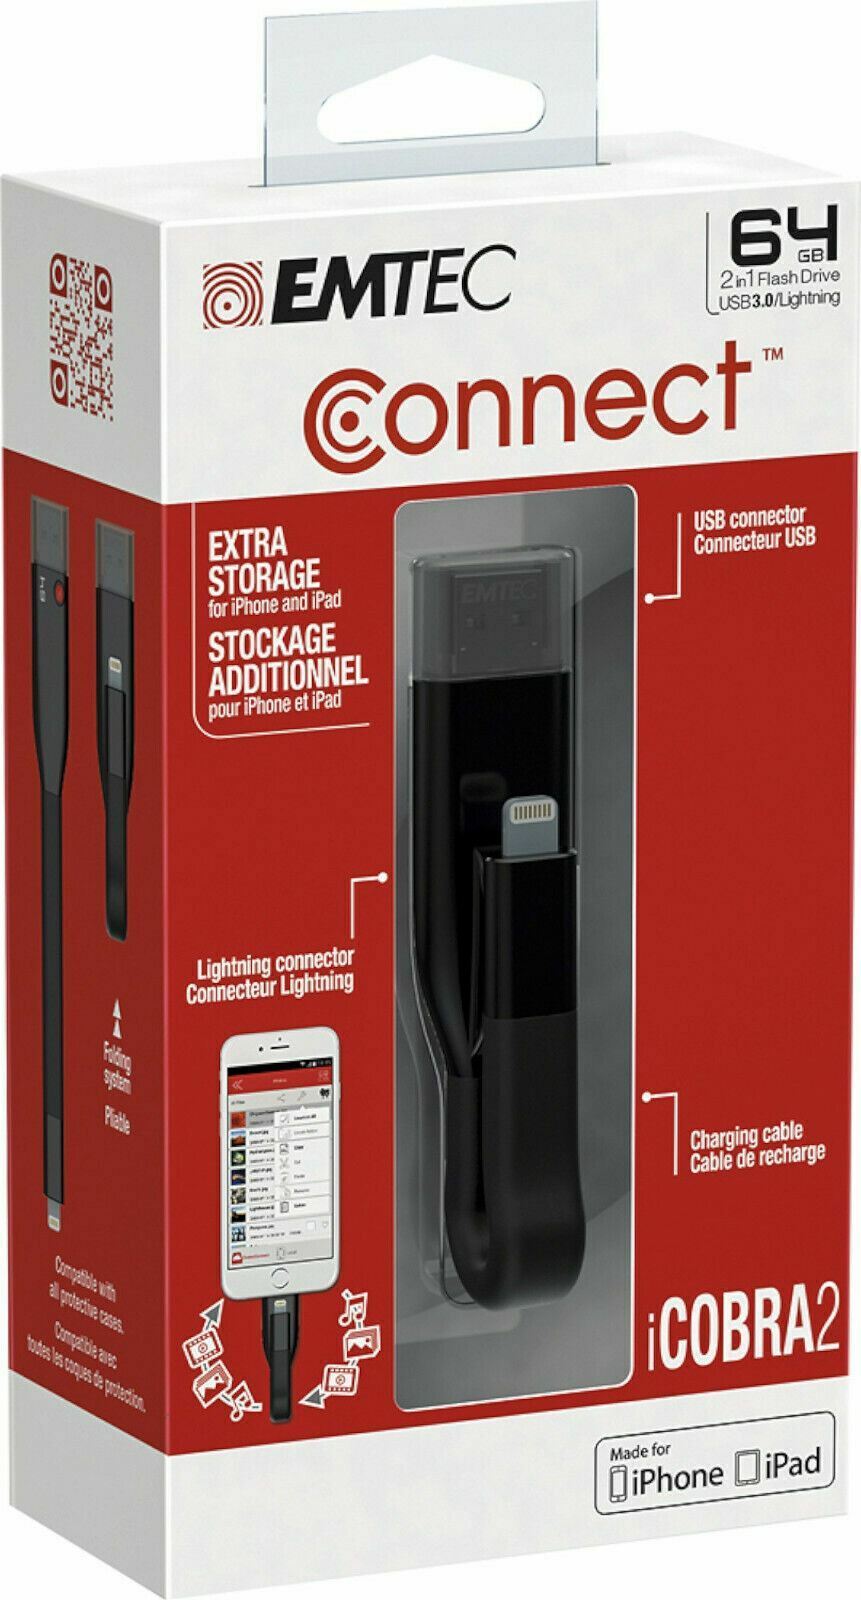 NEW Emtec Connect iCobra2 64GB Black USB 2In1 Flash Drive for iPhone 7+/6+/6S/5C